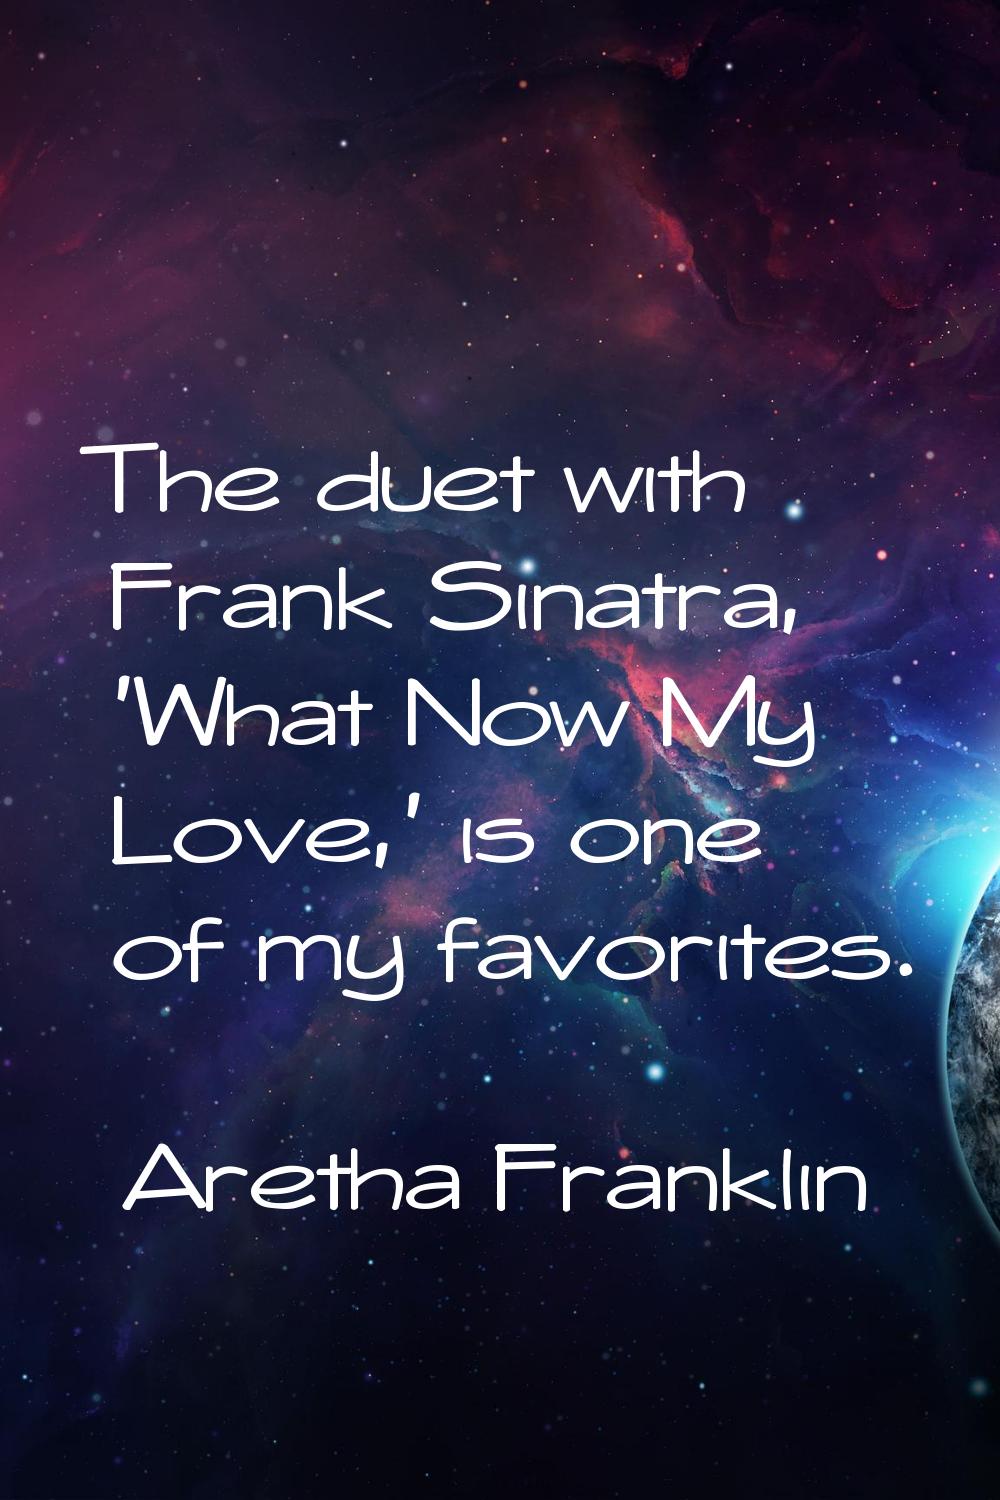 The duet with Frank Sinatra, 'What Now My Love,' is one of my favorites.